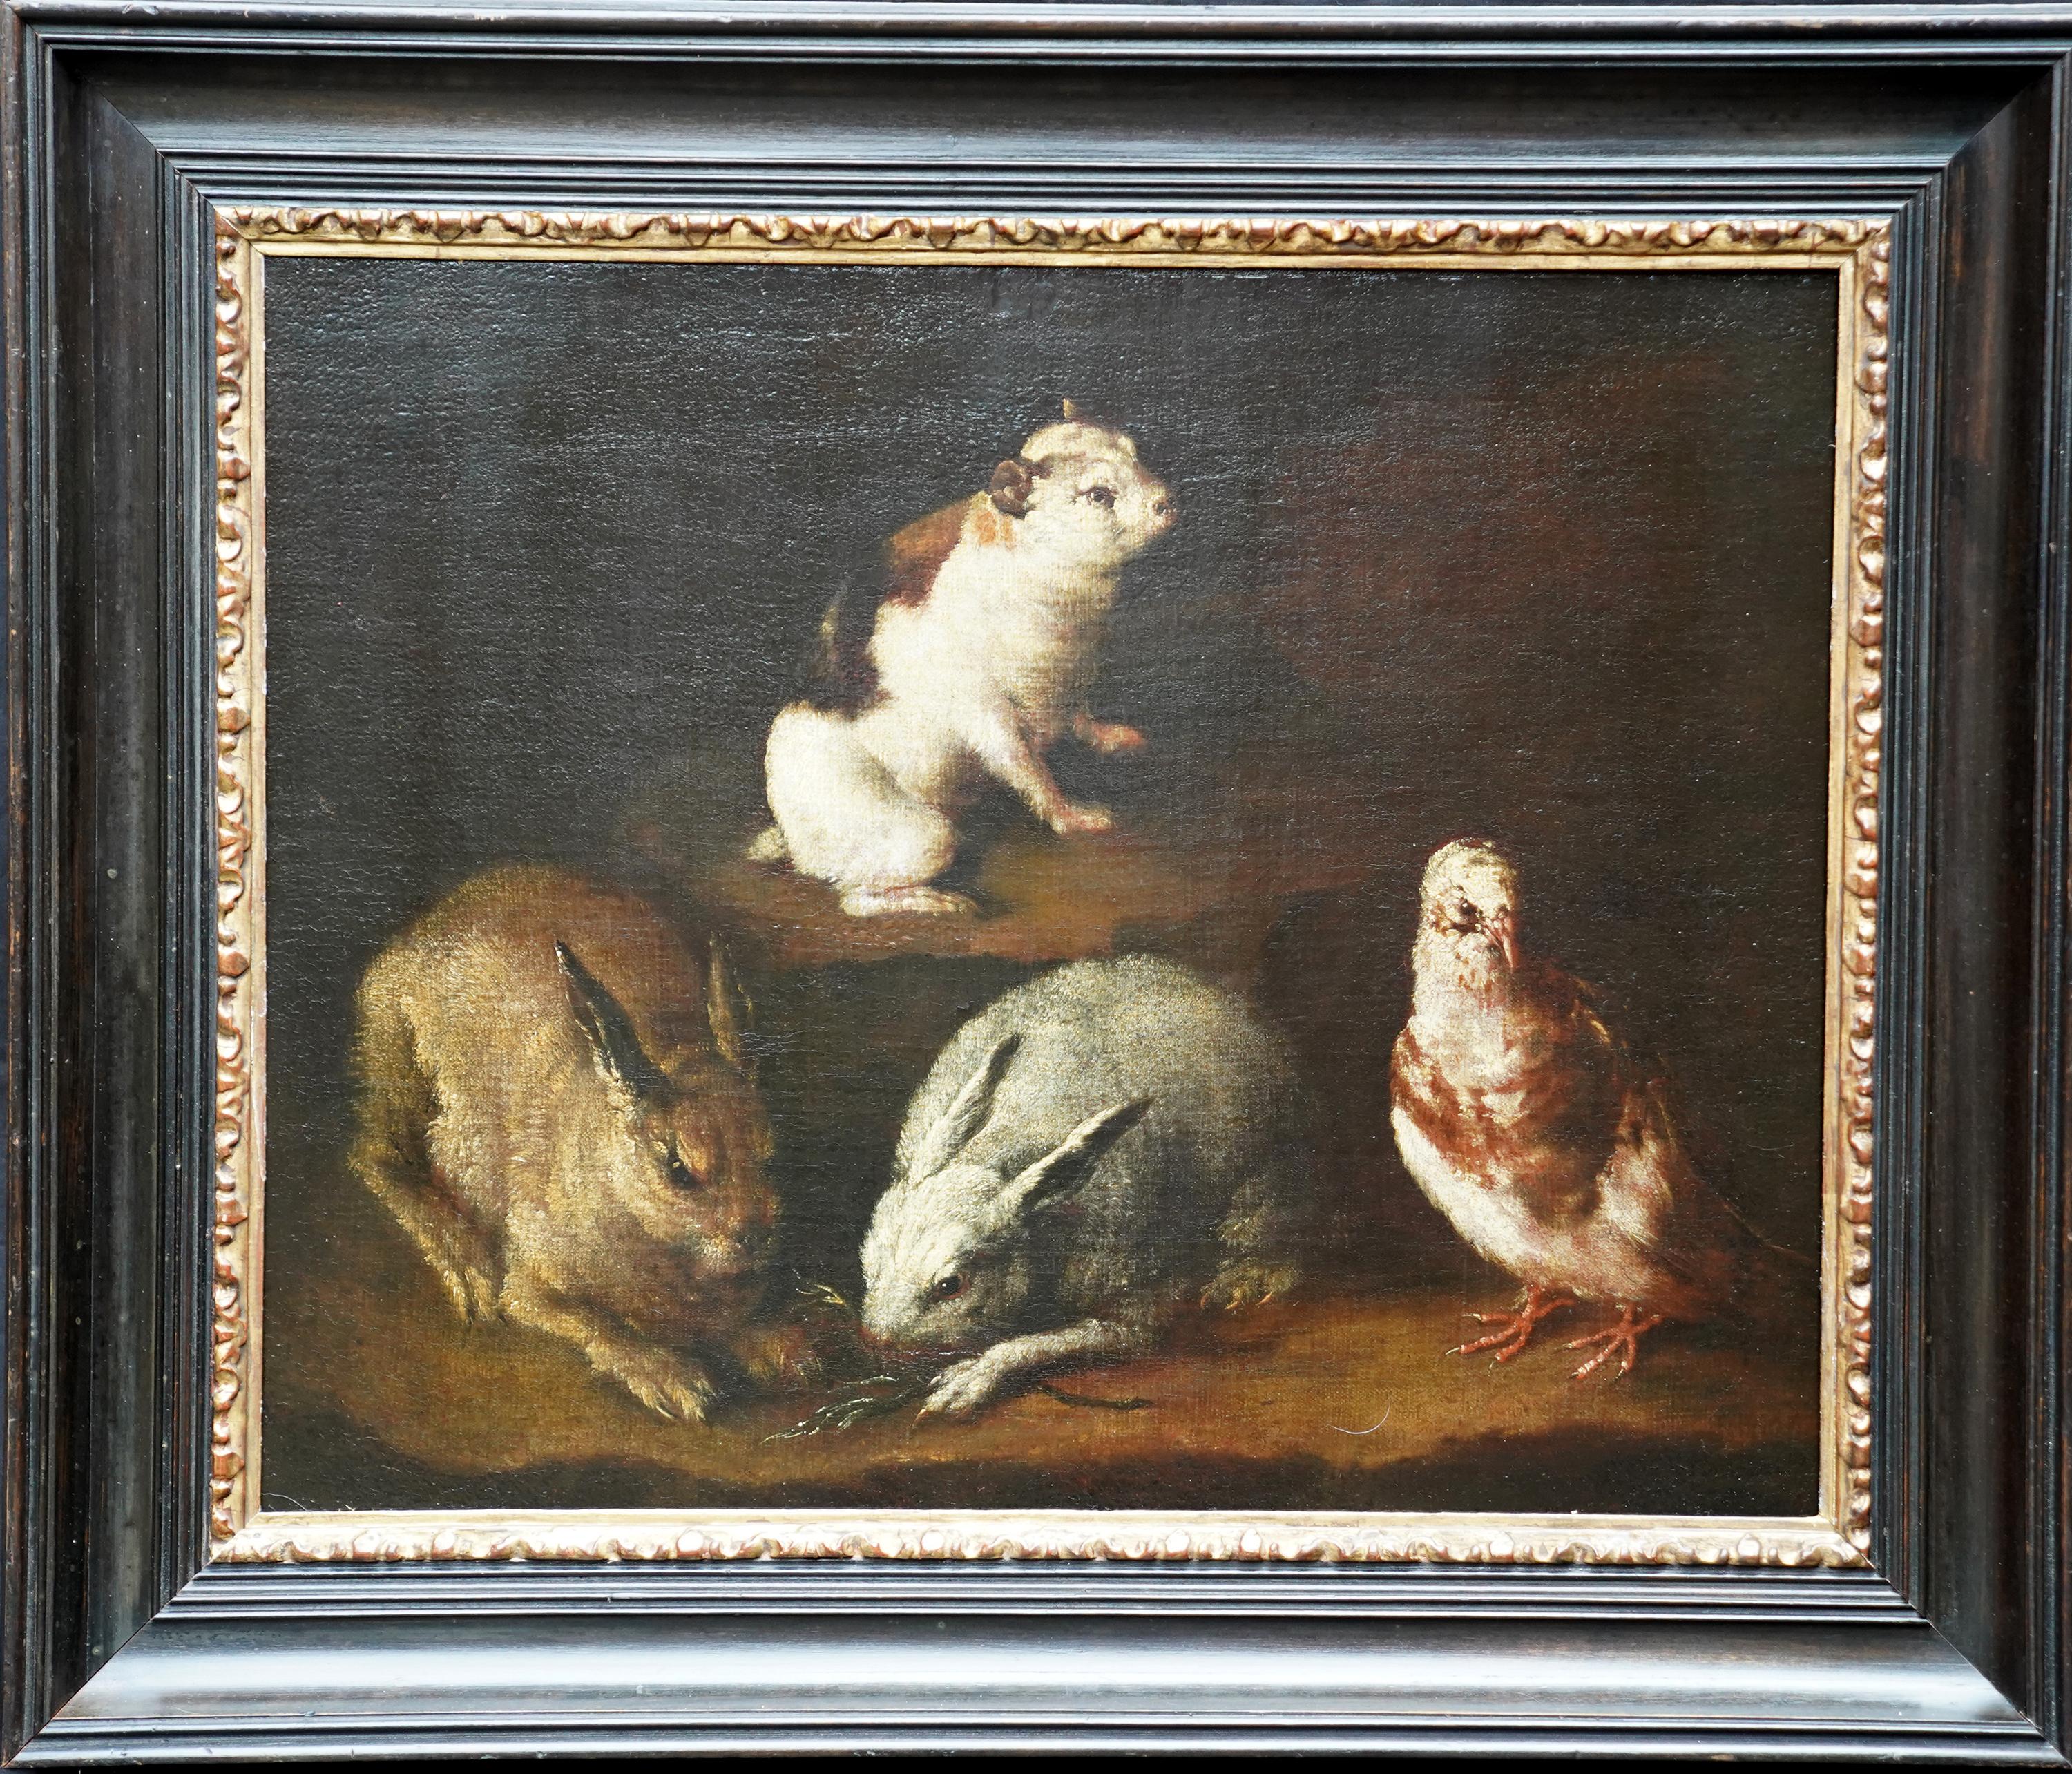 Giovanni Agostino Cassana  Animal Painting - Rabbits Dove and Guinea Pig in an Interior - Italian Old master art oil painting